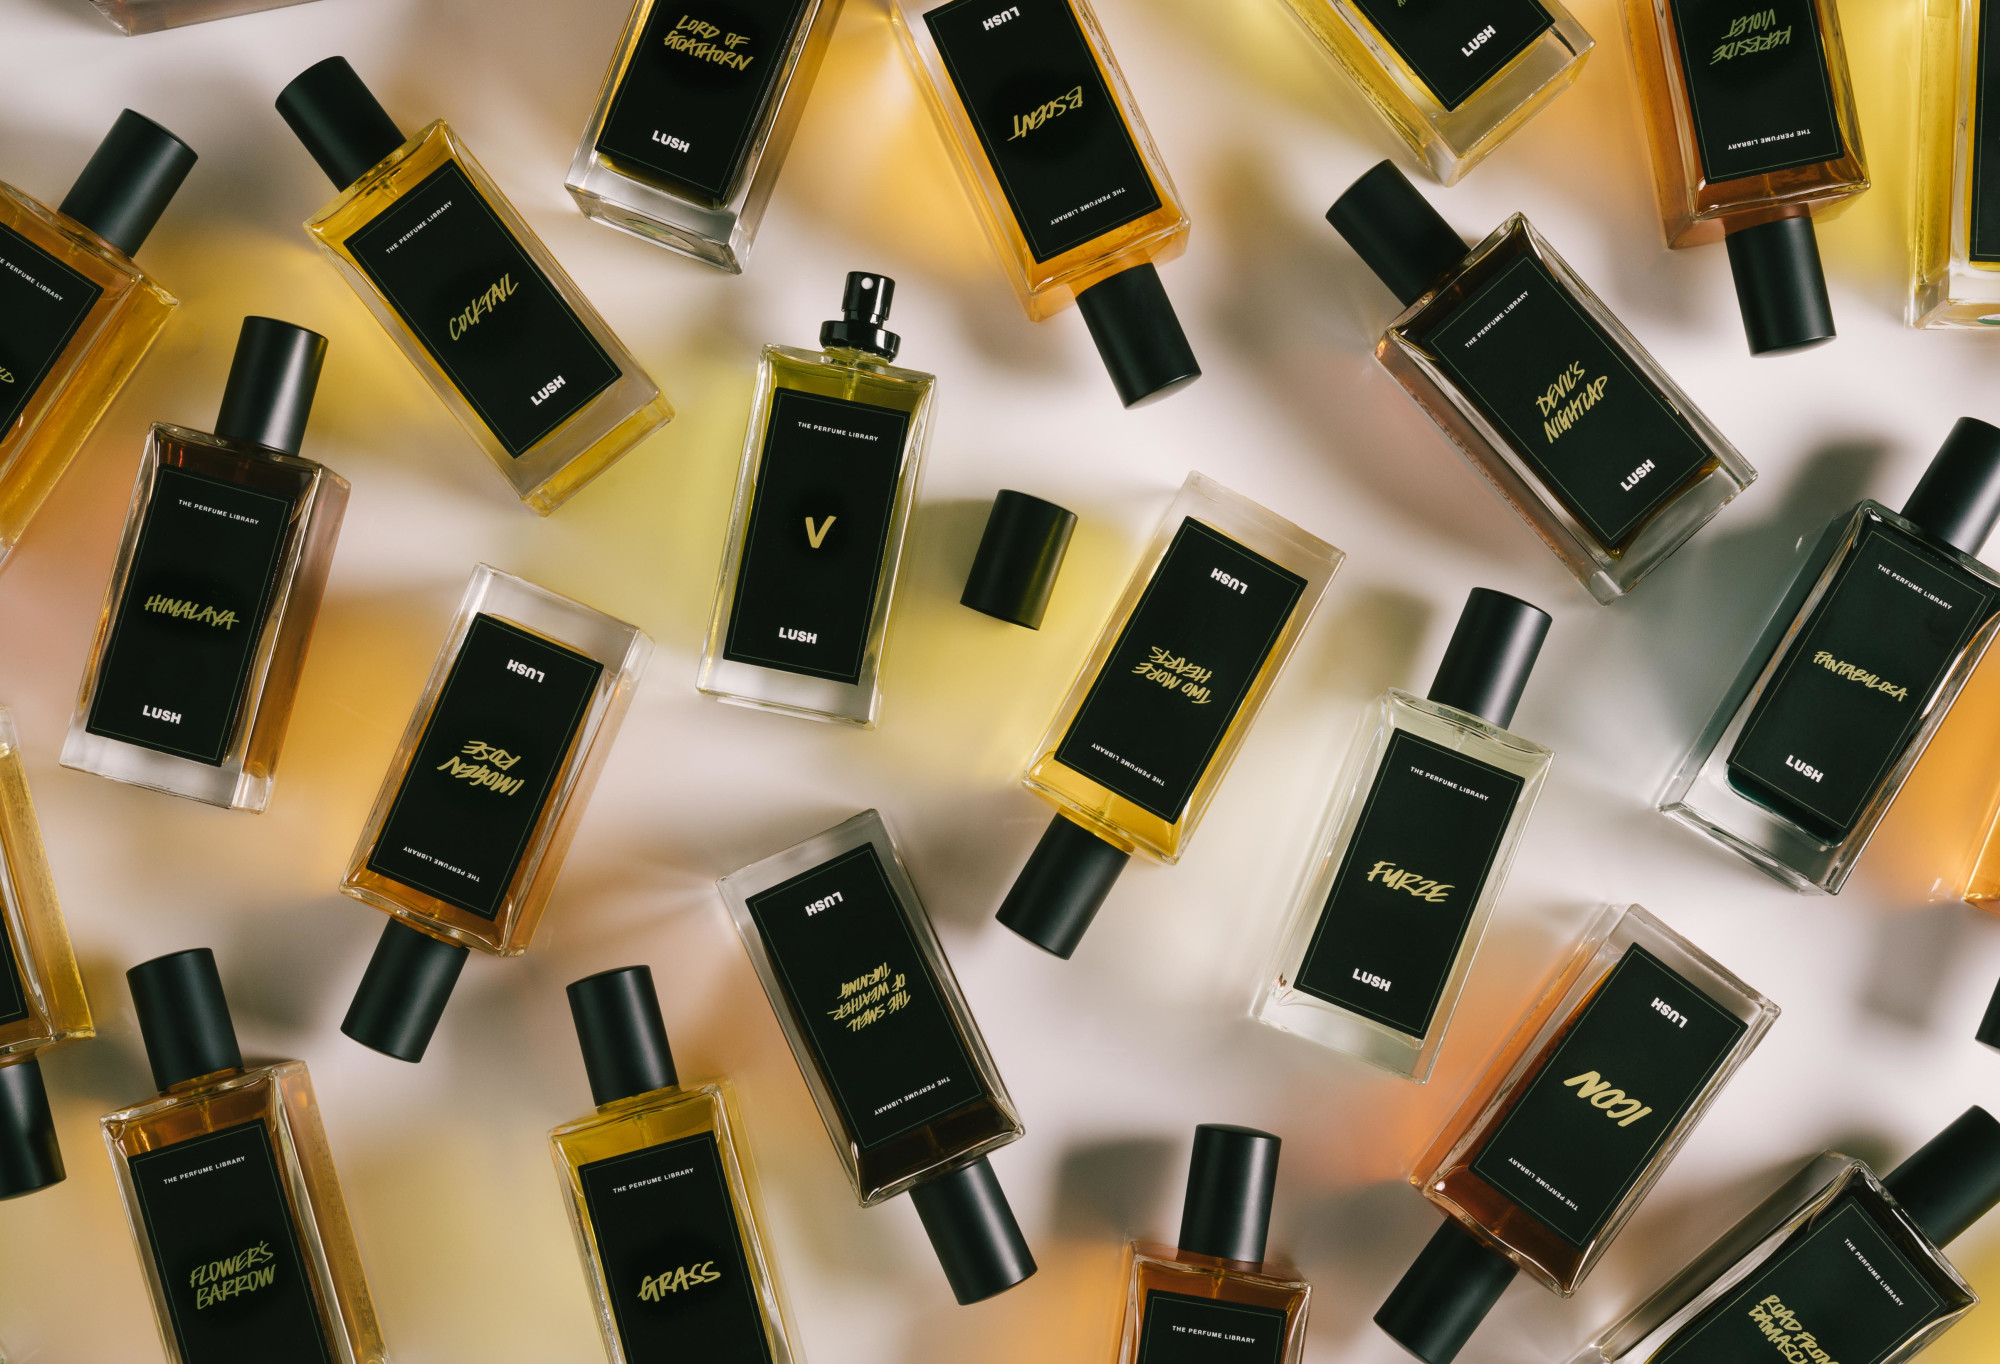 A number of black label perfume bottles are arranged randomly, with V in the centre, lid off, ready to spritz.